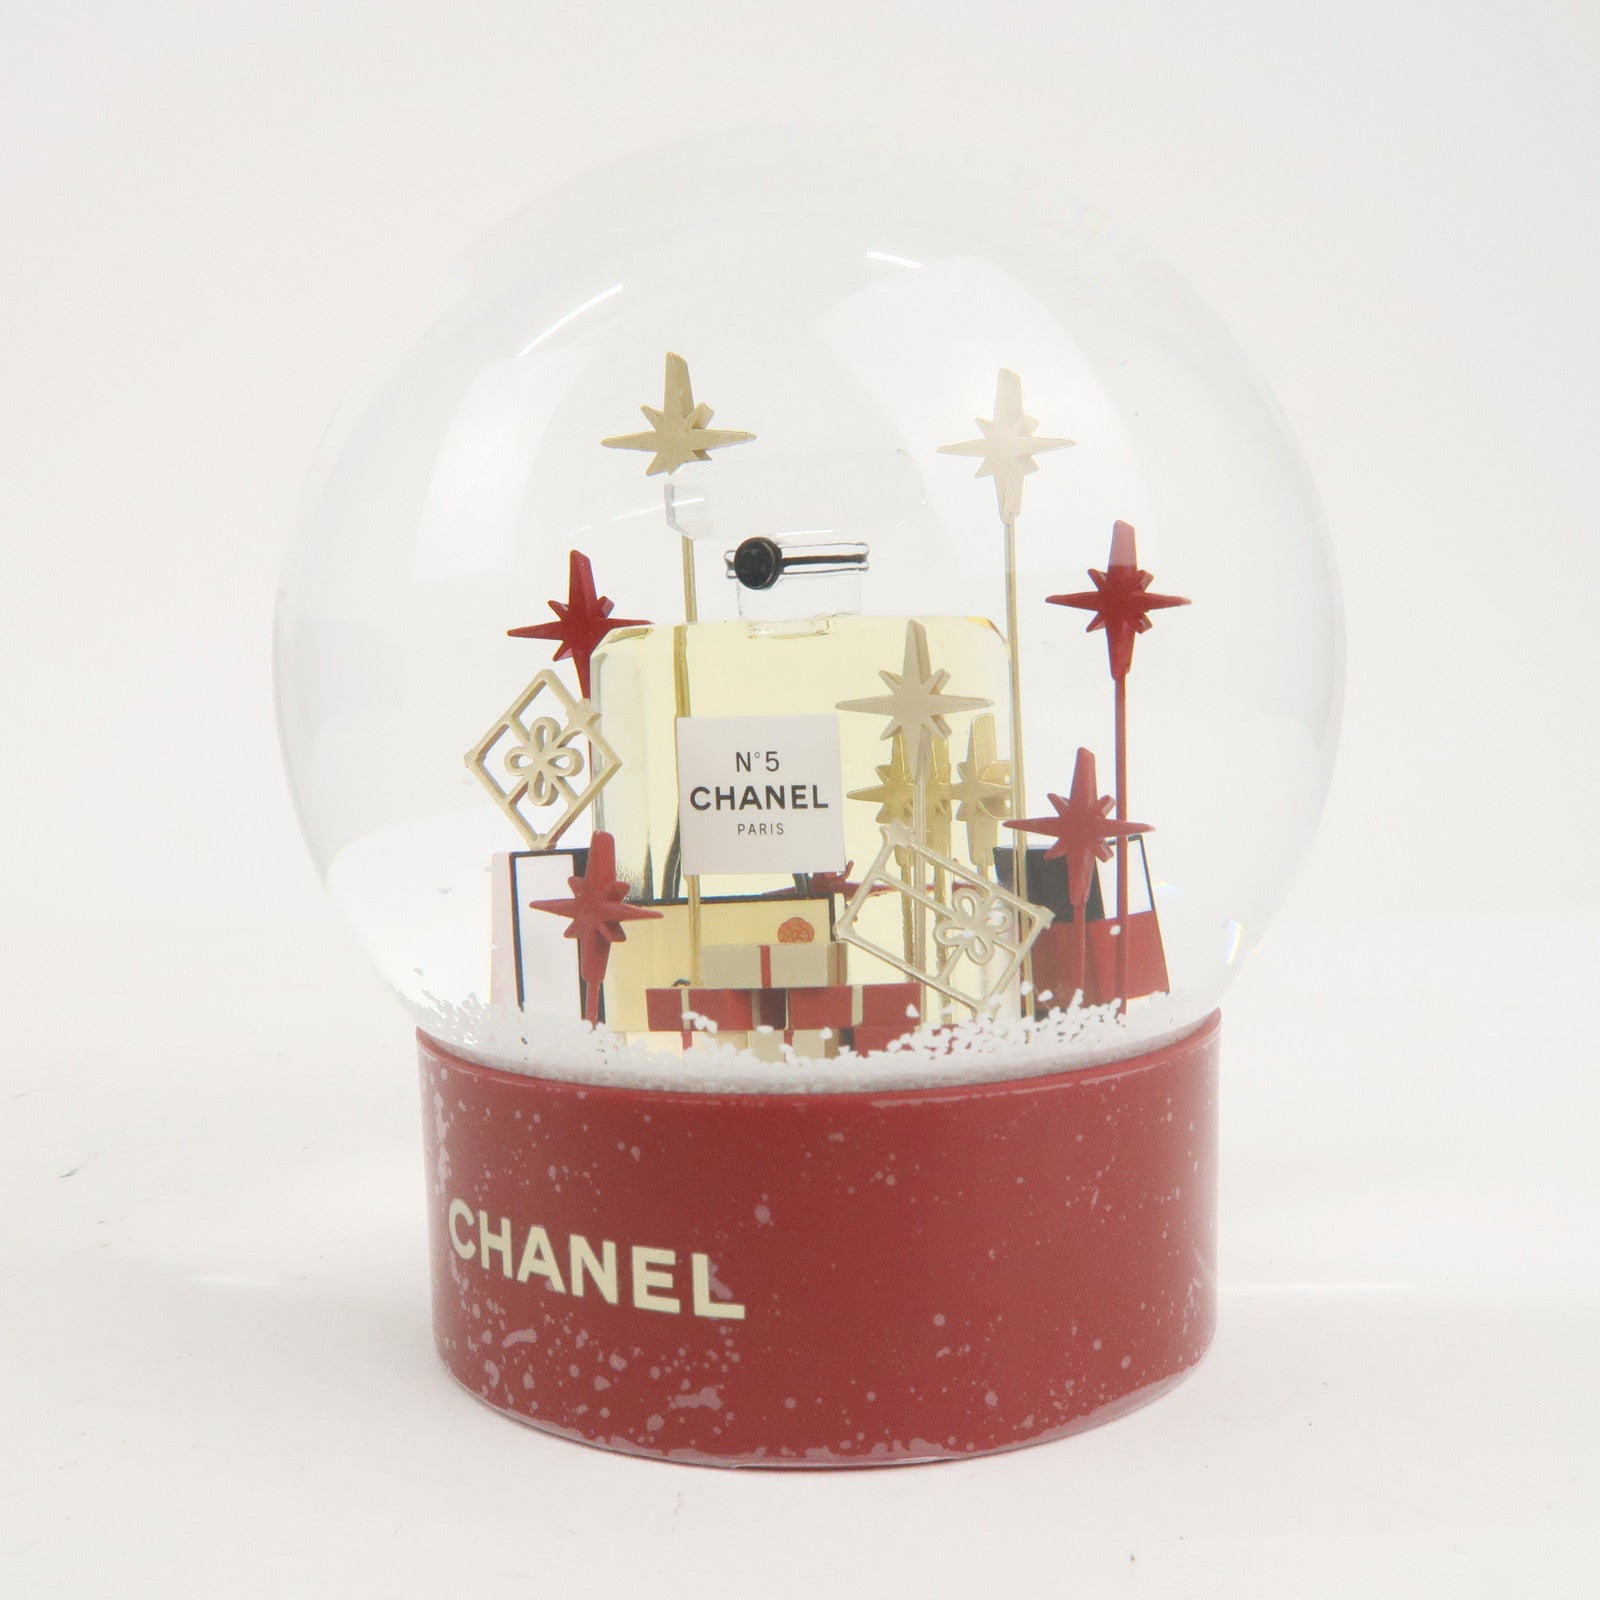 MINT NEW LOUIS VUITTON Snow Globe Dome Novelty 2022 Authentic with BOX